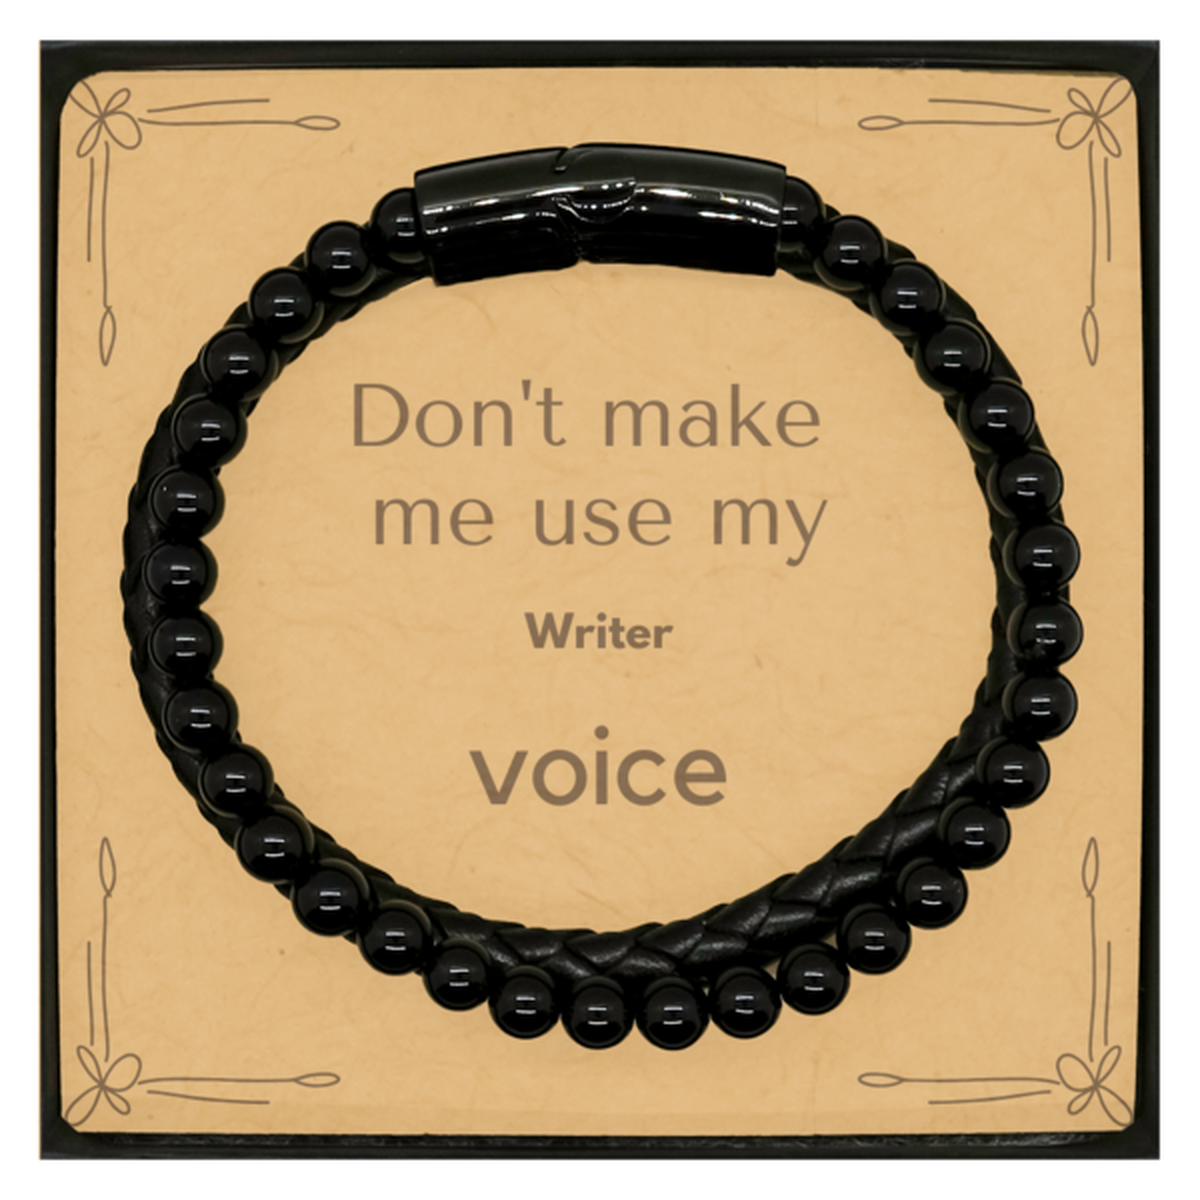 Don't make me use my Writer voice, Sarcasm Writer Card Gifts, Christmas Writer Stone Leather Bracelets Birthday Unique Gifts For Writer Coworkers, Men, Women, Colleague, Friends